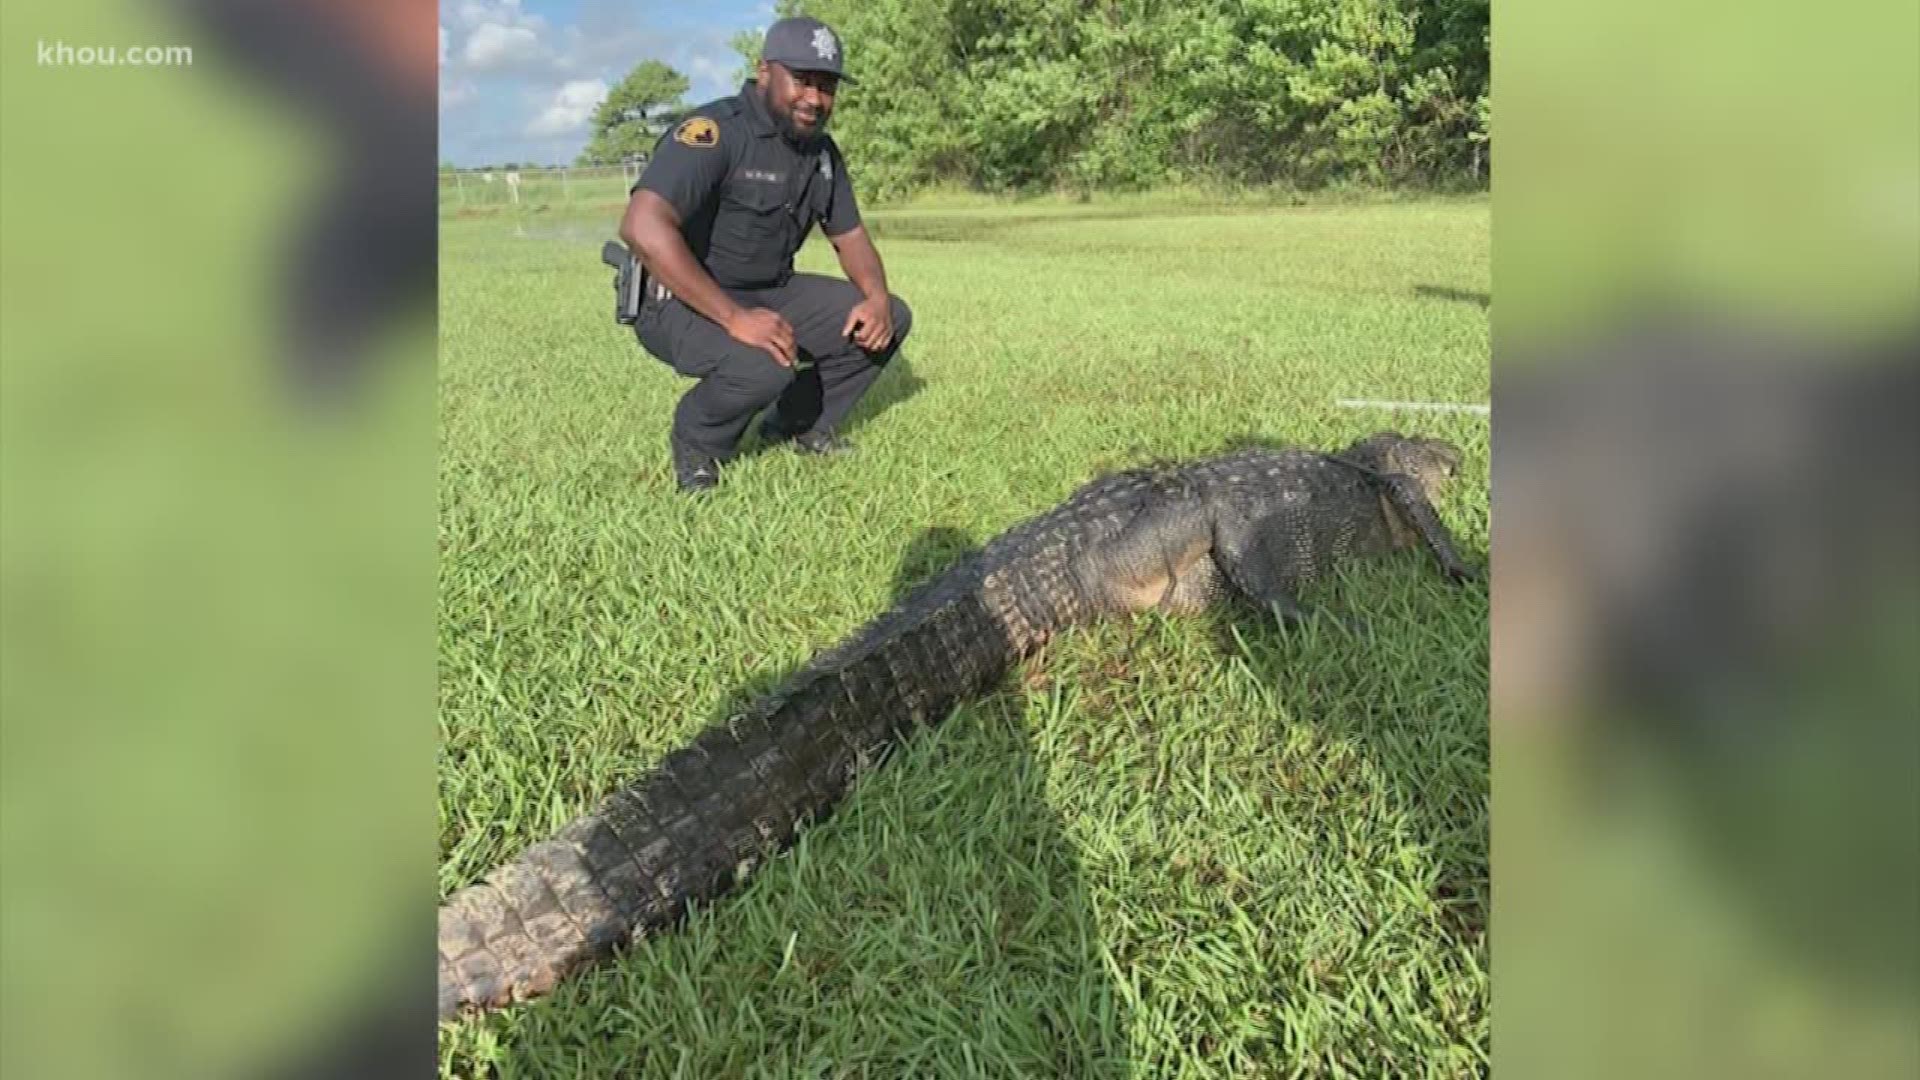 An alligator was spotted on a campus lawn Friday at North Shore Senior High School, not far away from standing water and a wooded area.